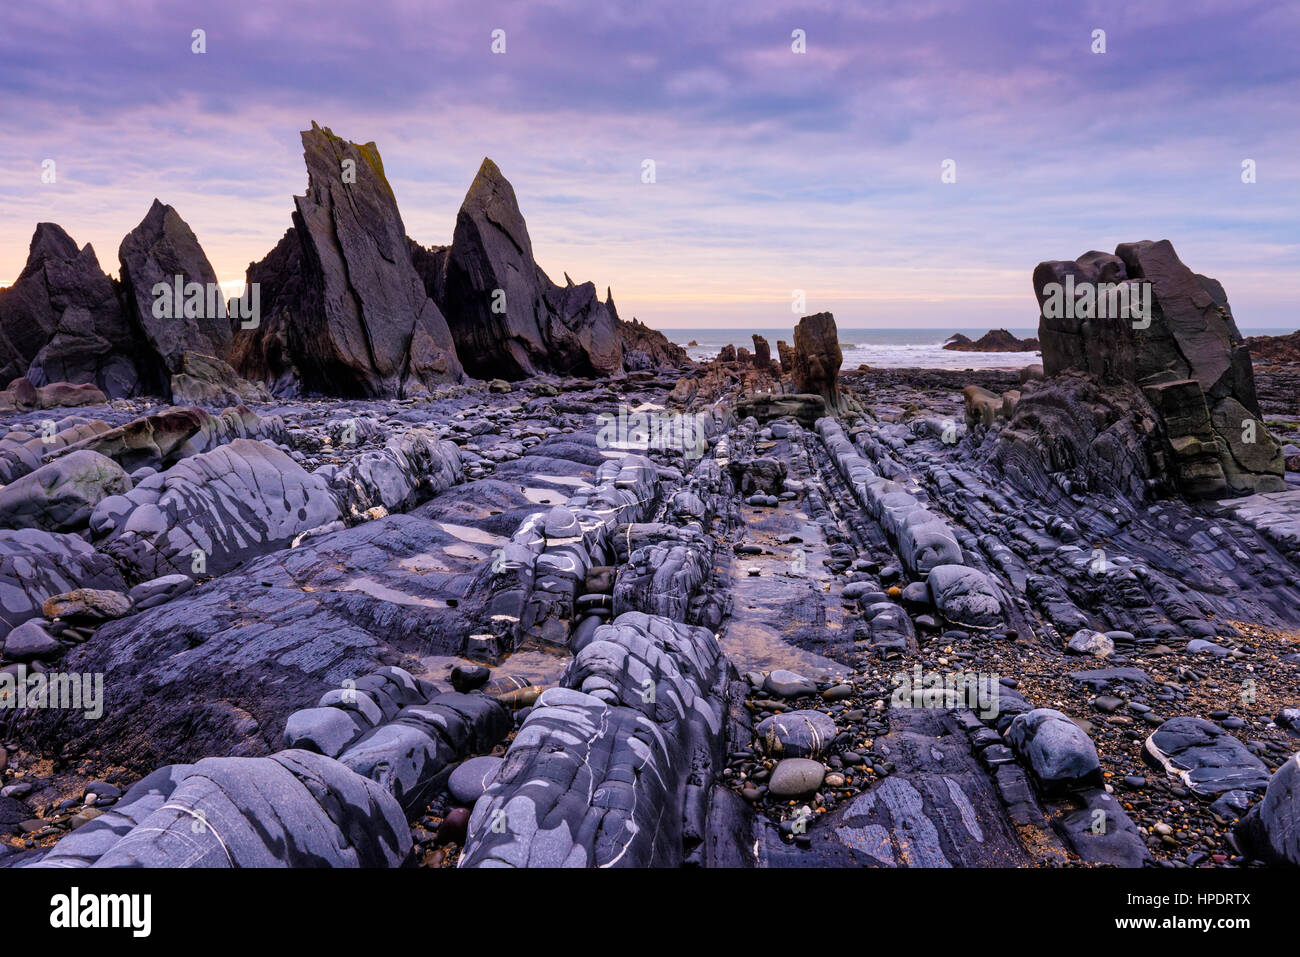 Rocks exposed at low tide at Duckpool on the Heritage Coast of North Cornwall, England. Stock Photo